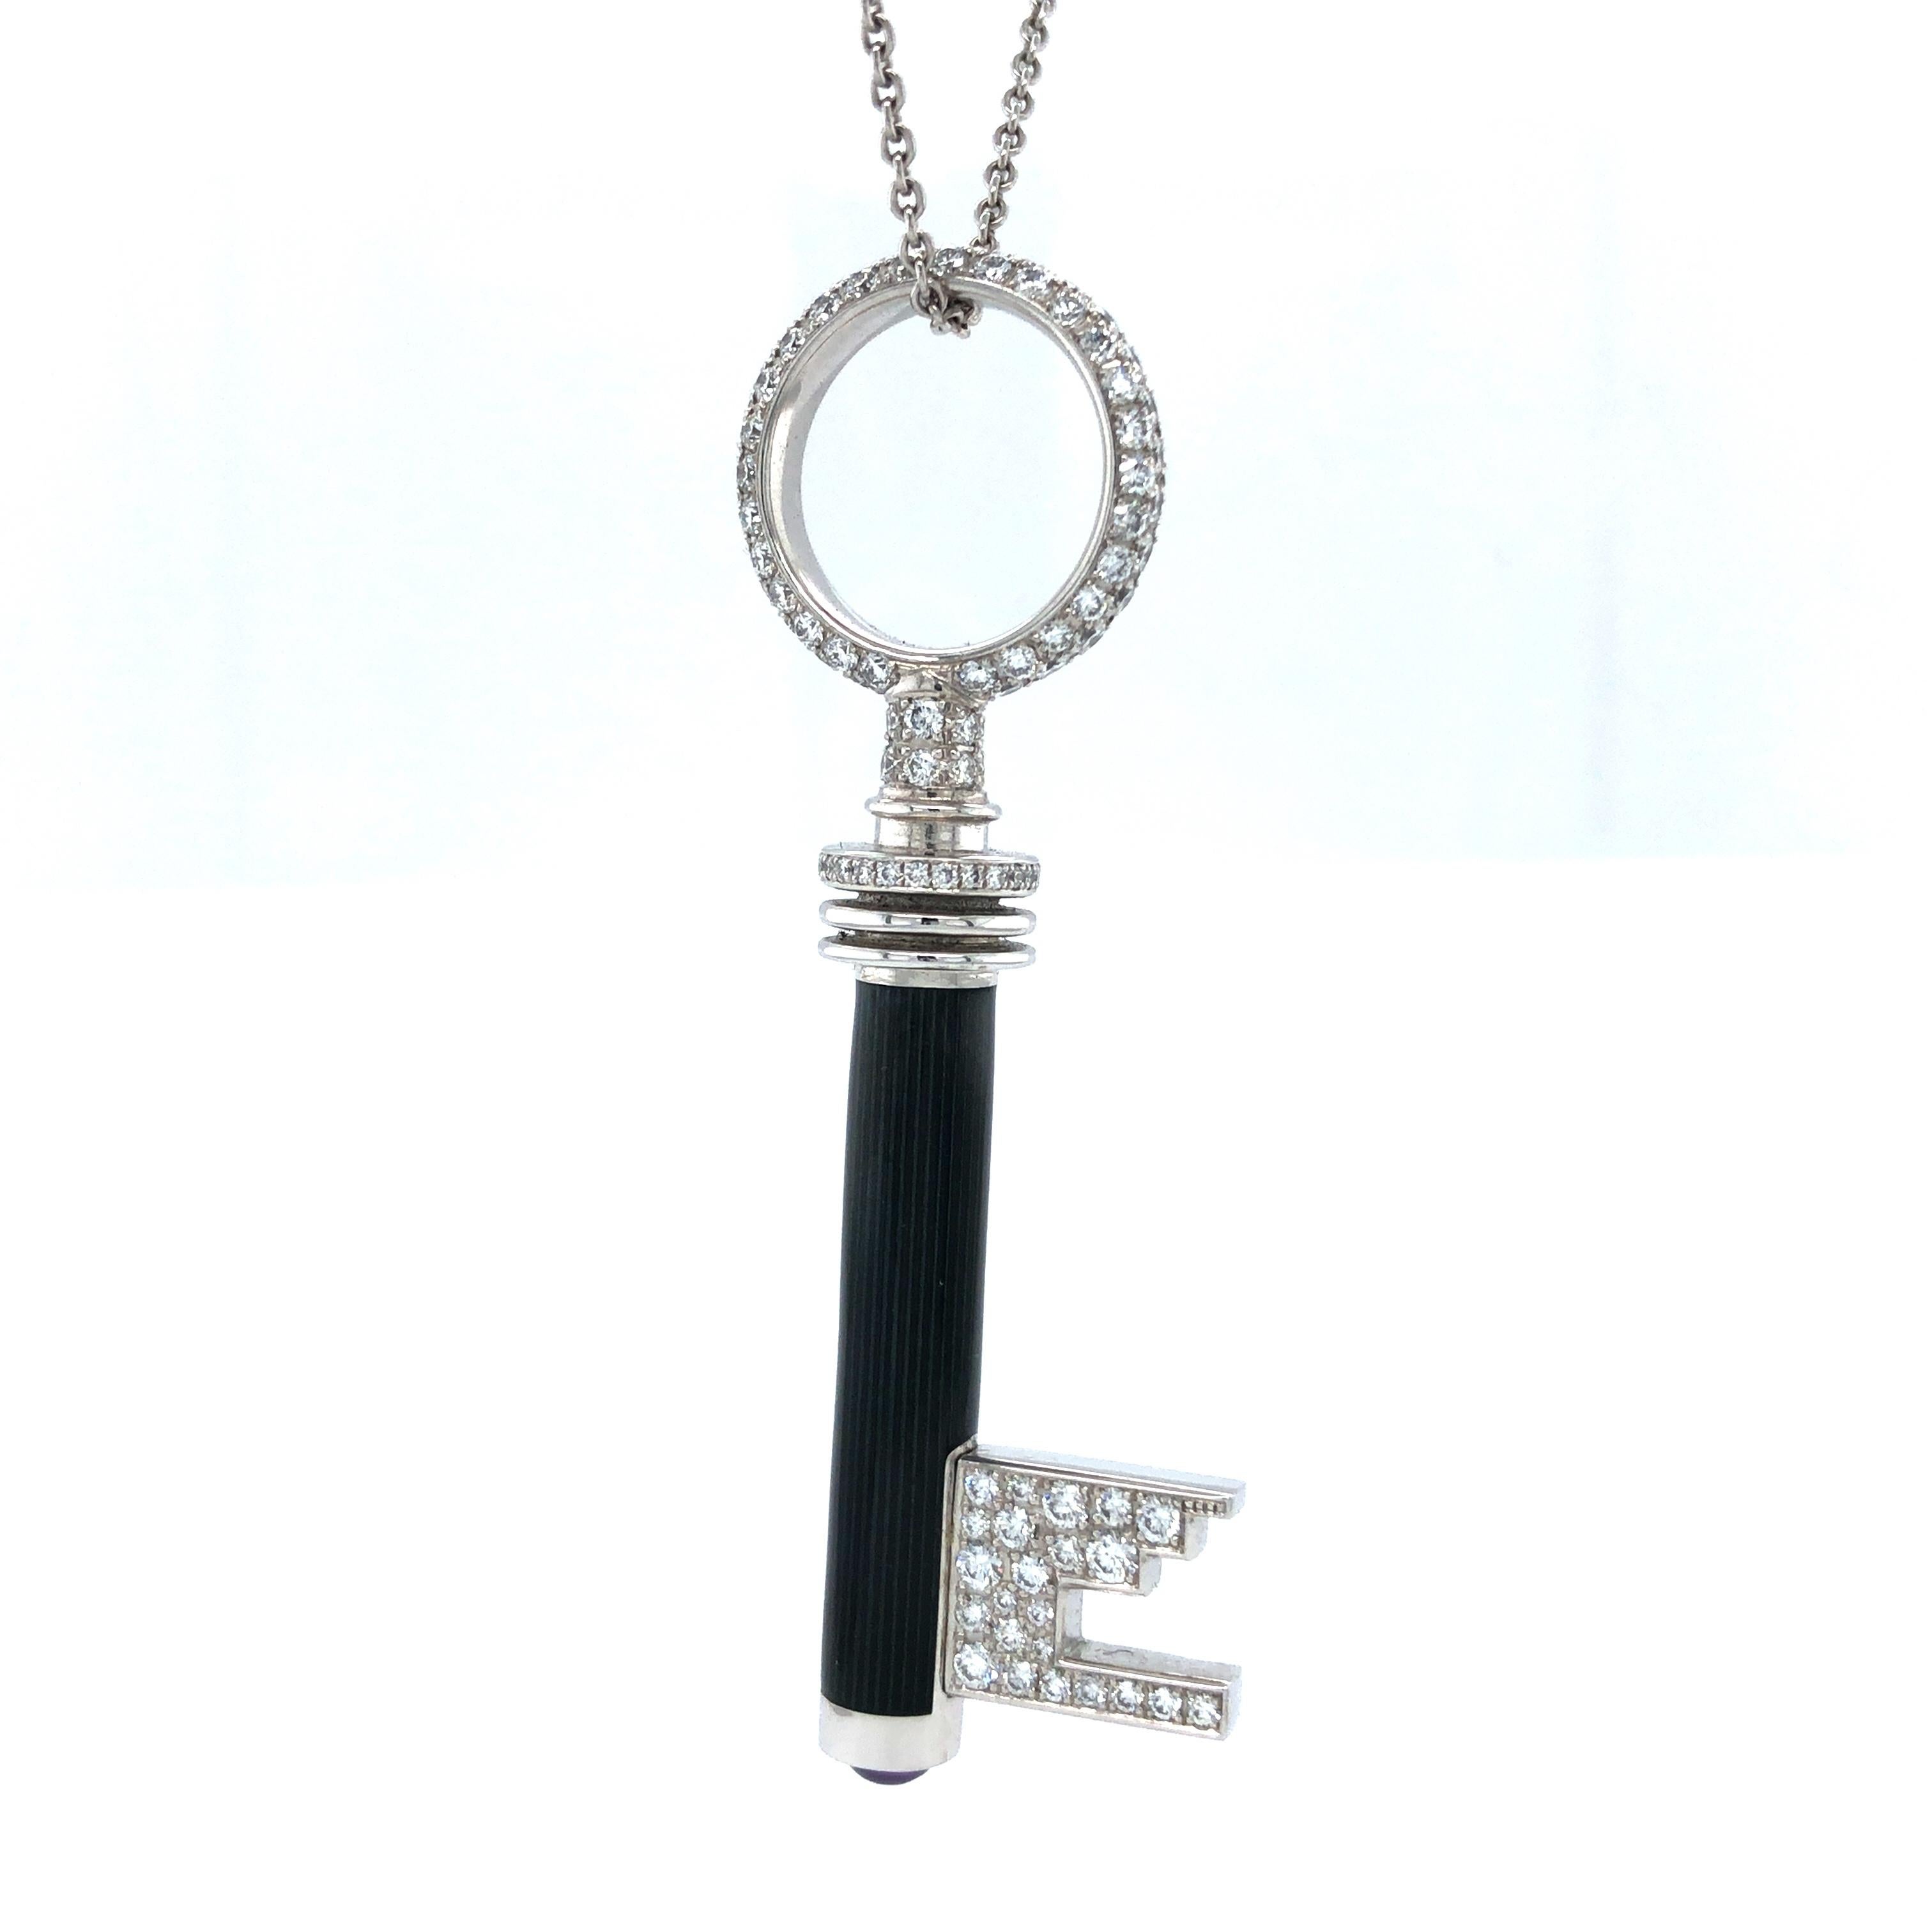 Victor Mayer key pendant necklace, 18k white gold, falcon grey vitreous enamel, 162 diamonds, total 1.90 ct, G VS brilliant cut, Amethyst

About the creator Victor Mayer
Victor Mayer is internationally renowned for elegant timeless designs and